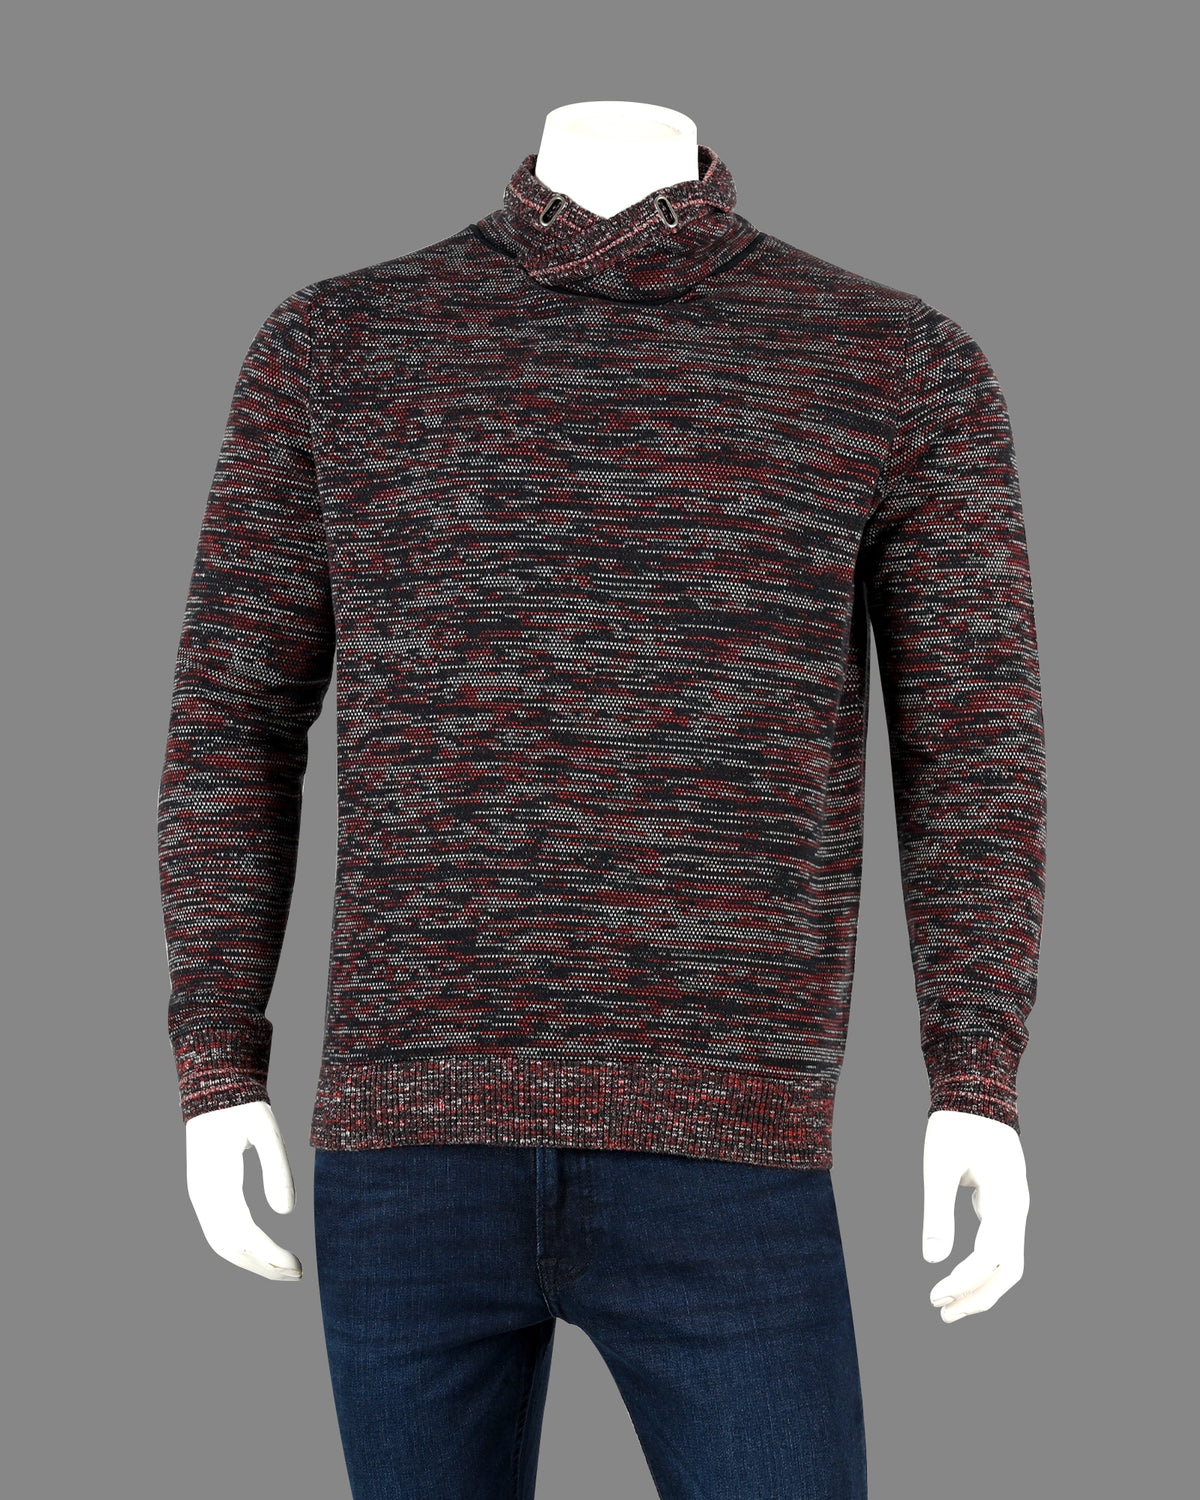 Men's Shawl Neck Knitted Sweater